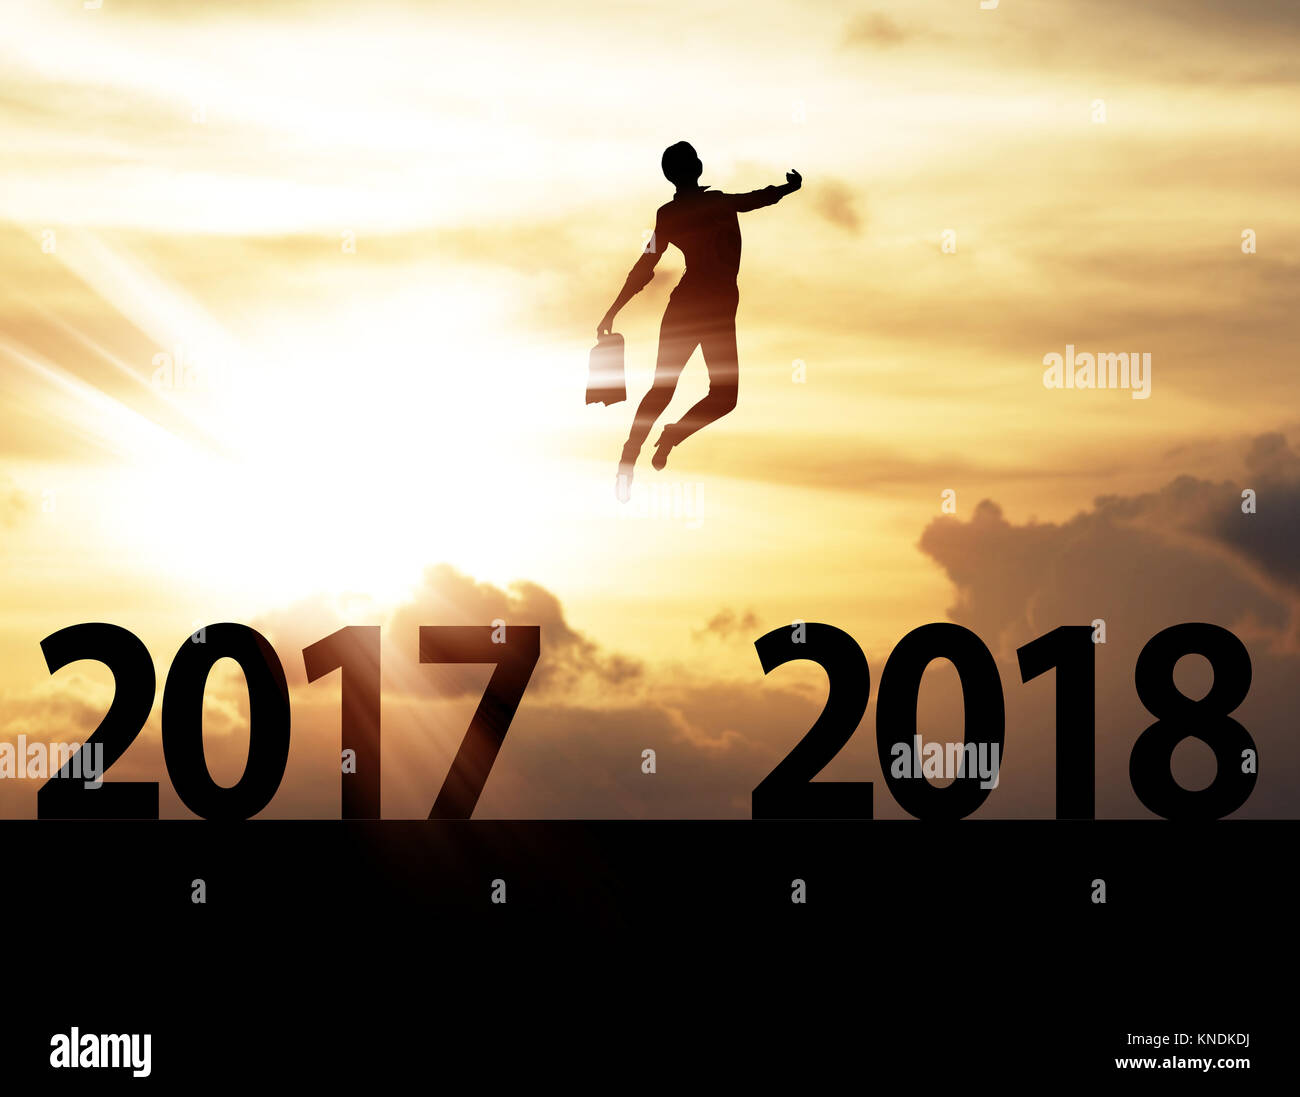 Men jump over silhouette Happy New Year 2018 Stock Photo